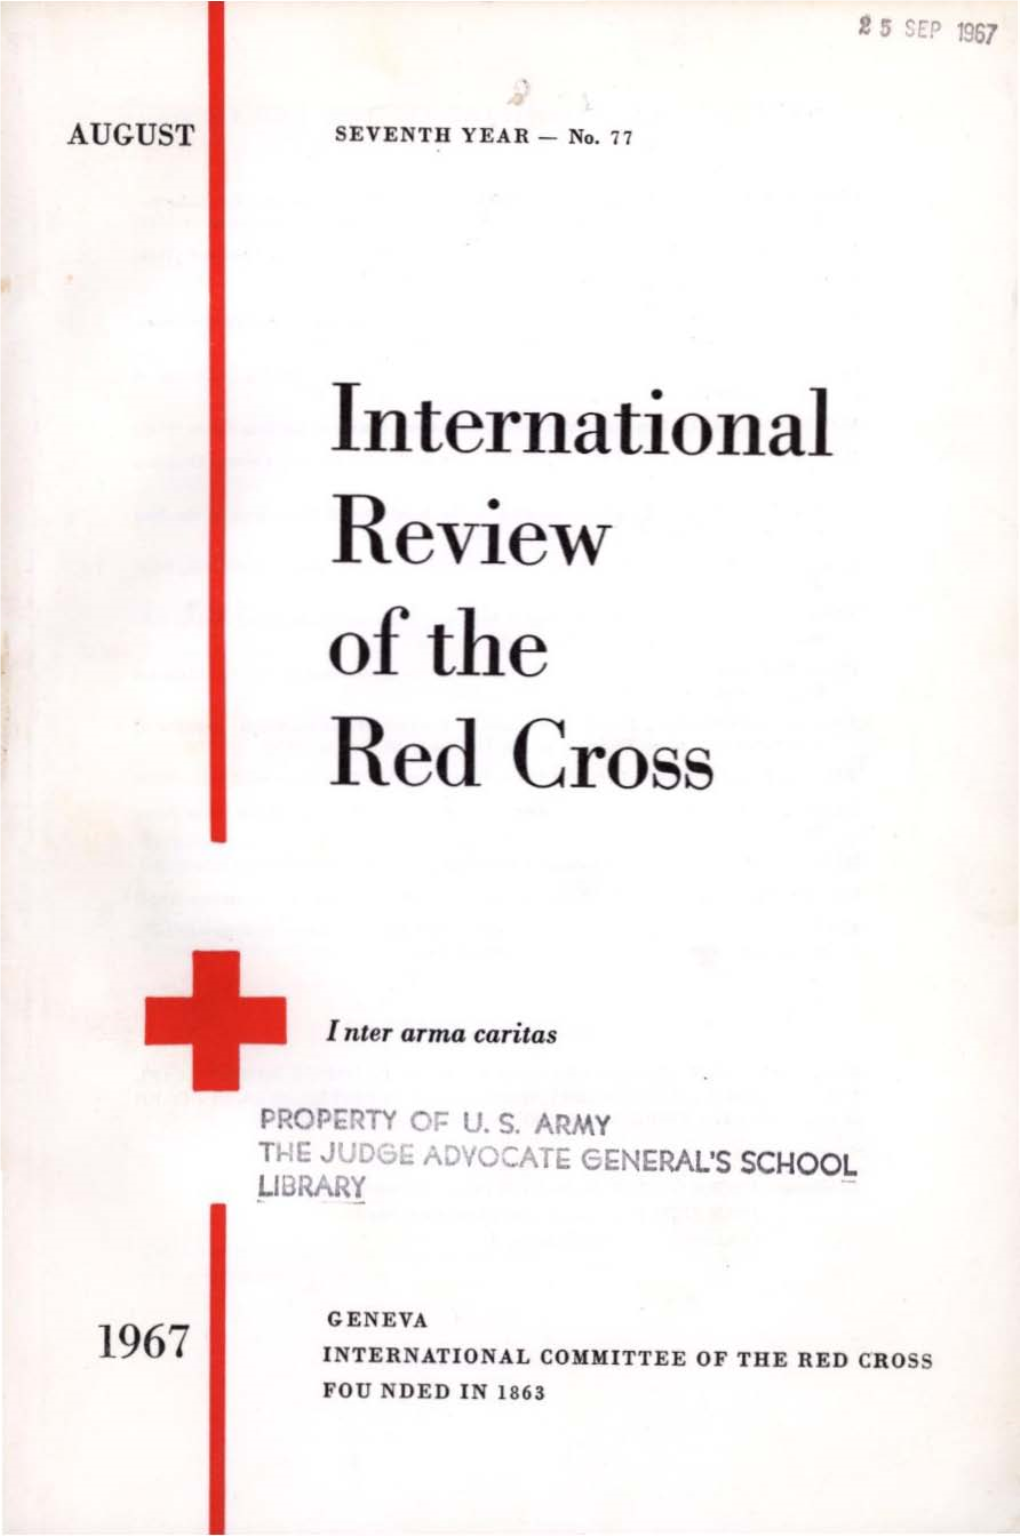 International Review of the Red Cross, August